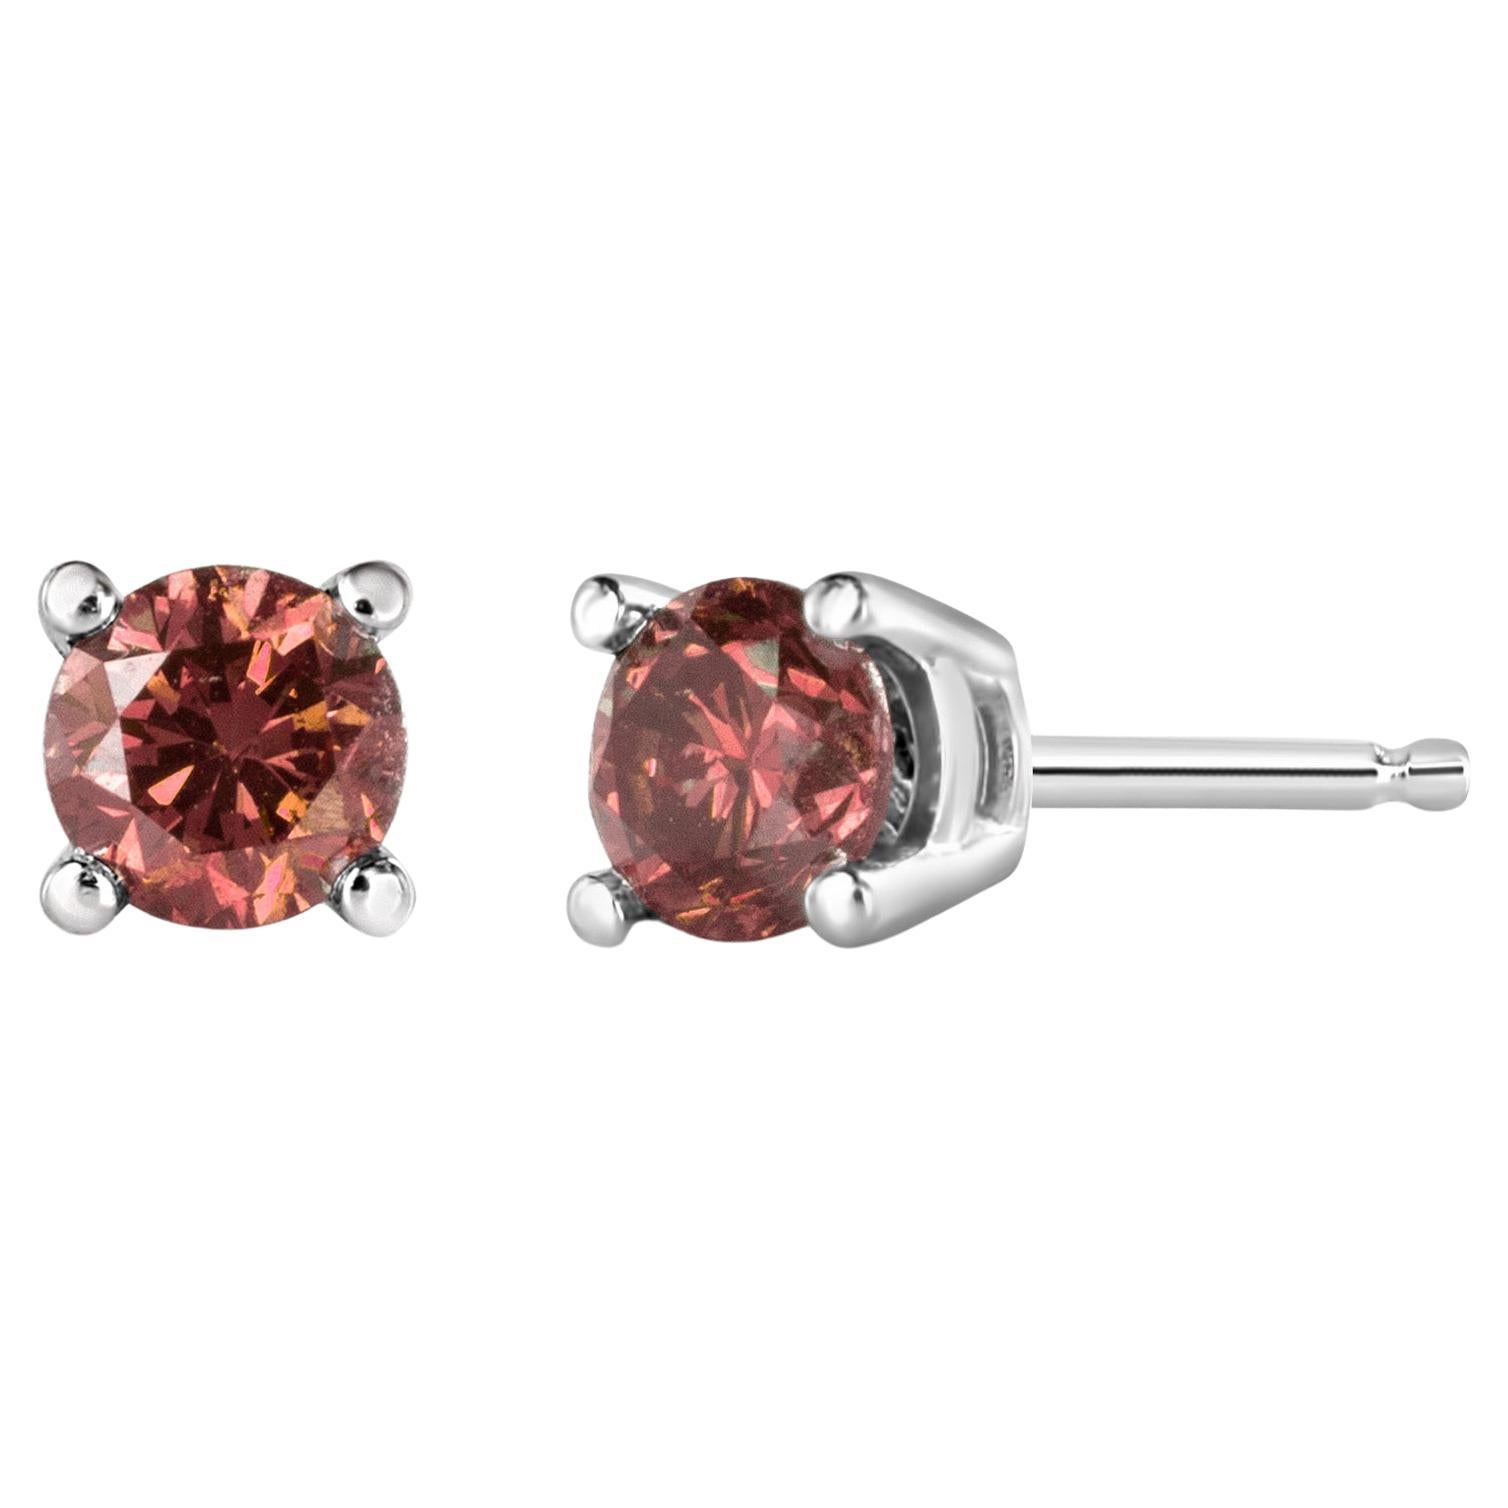 14K White Gold 1/3 Carat Round Brilliant-Cut Pink Diamond Solitaire Stud Earring For Sale